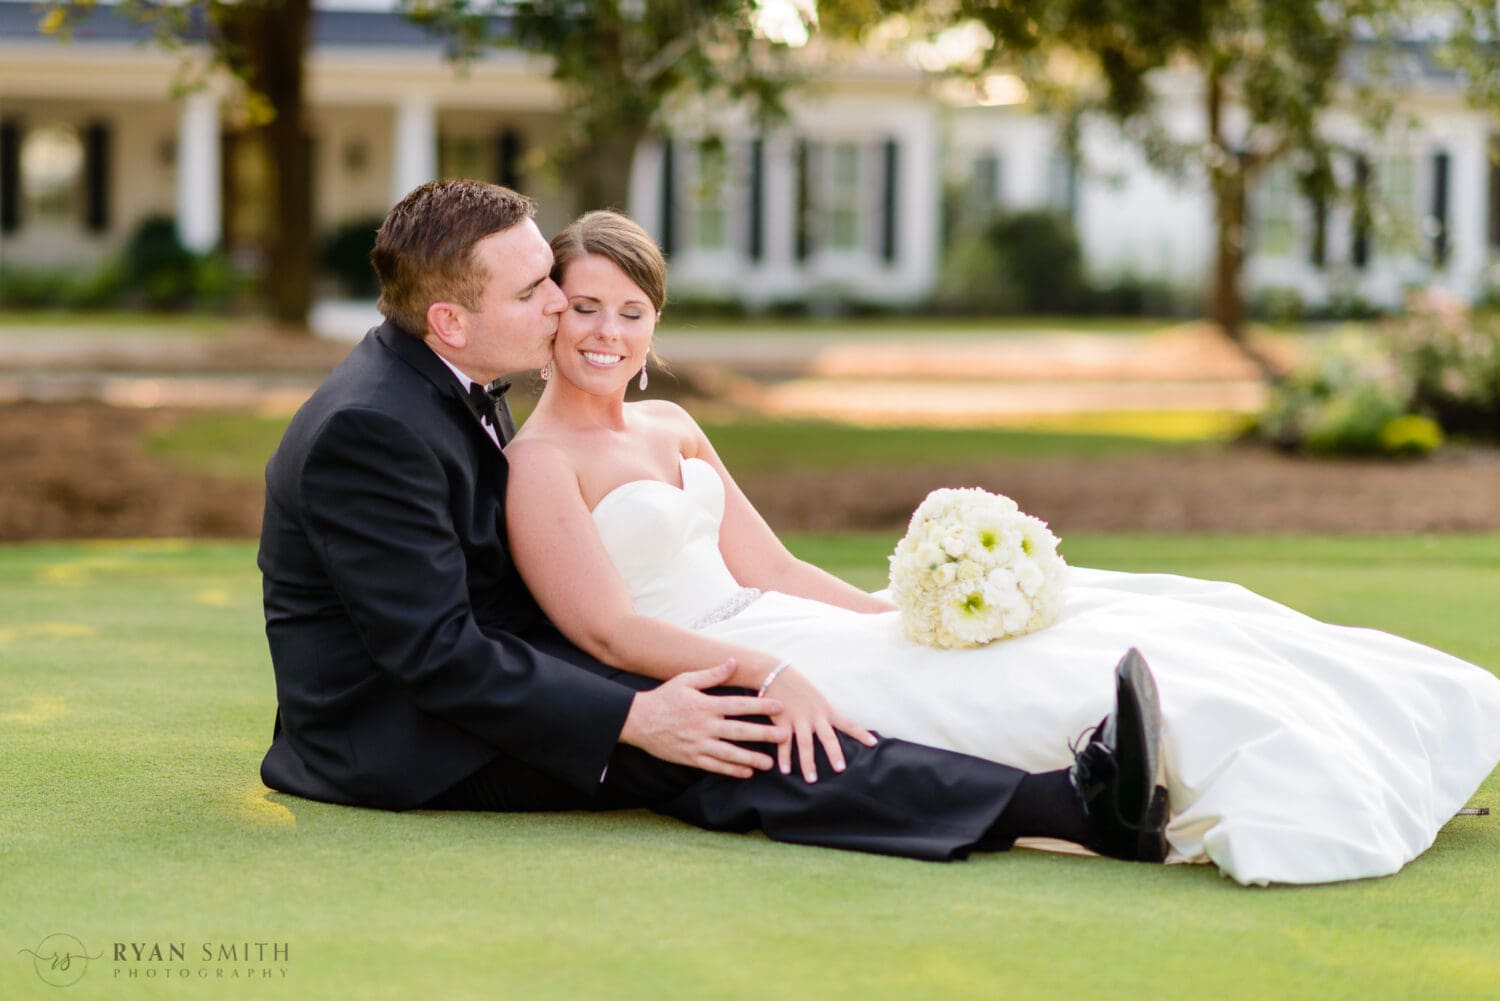 Kiss on the cheek in front of the clubhouse - Daniel Island Club - Charleston, SC